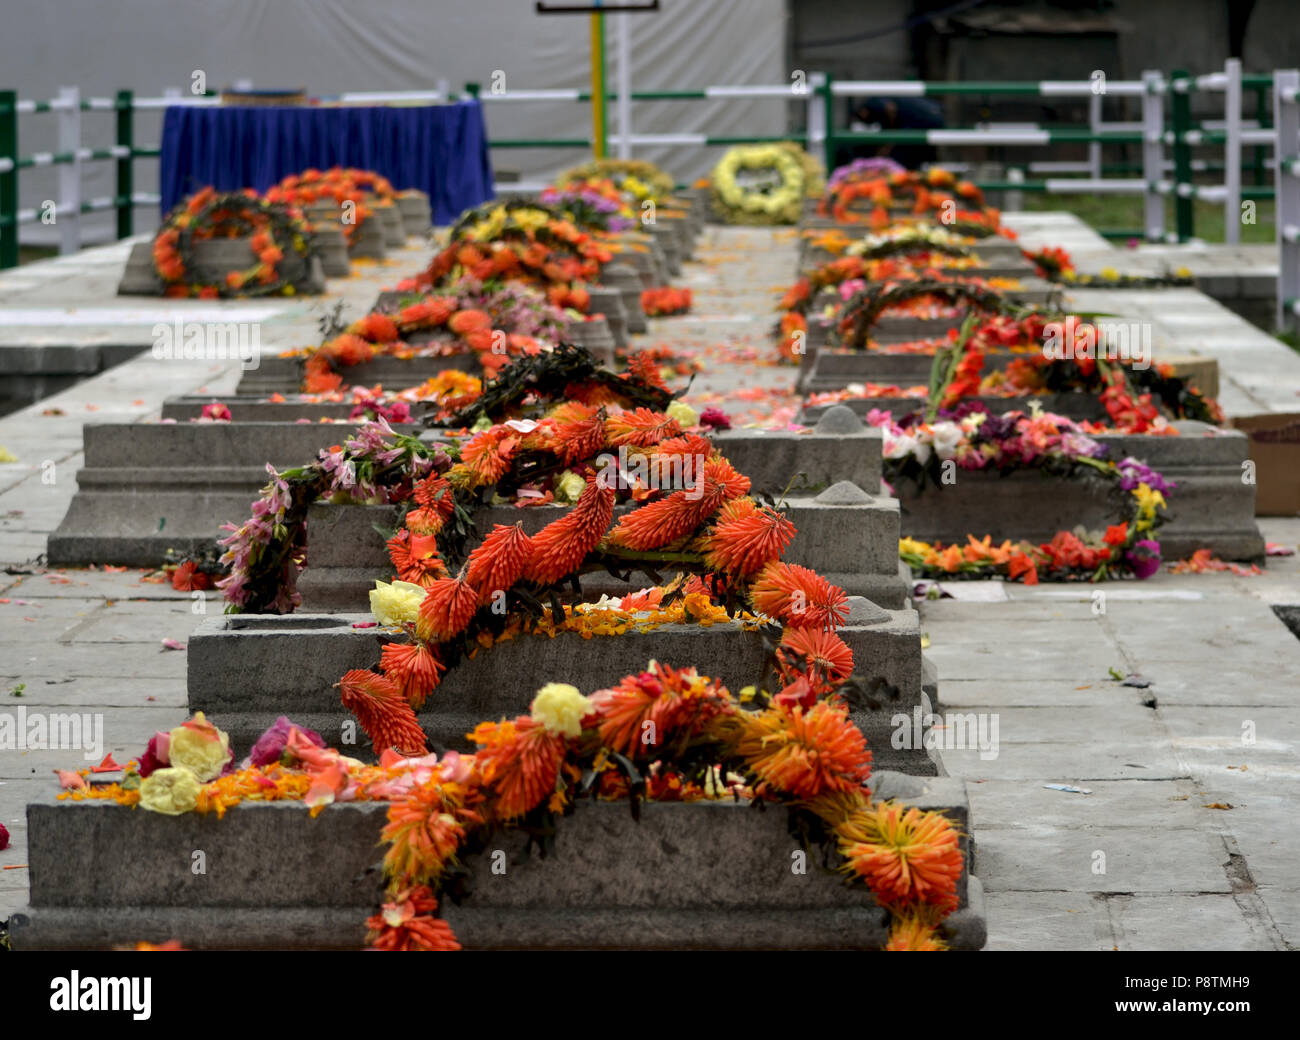 Srinagar, Kashmir. 13th July, 2018.Wreaths can be seen laying on graves at Martyr's graveyard in Srinagar, the summer capital of Indian controlled Kashmir, India, during a ceremony held to mark the martyrdom anniversary of Kashmiris slain by the army of a Hindu king. Indian Authorities in Srinagar deployed thousands of security personnel in the main city of Srinagar to prevent the anti-Indian protests in the downtown area of Srinagar. Every year on 13th July Kashmir observes the martyrdom anniversary of 23 Muslims which were killed by the forces of Maharaja Hari Singh in 1931 during his rule. Stock Photo